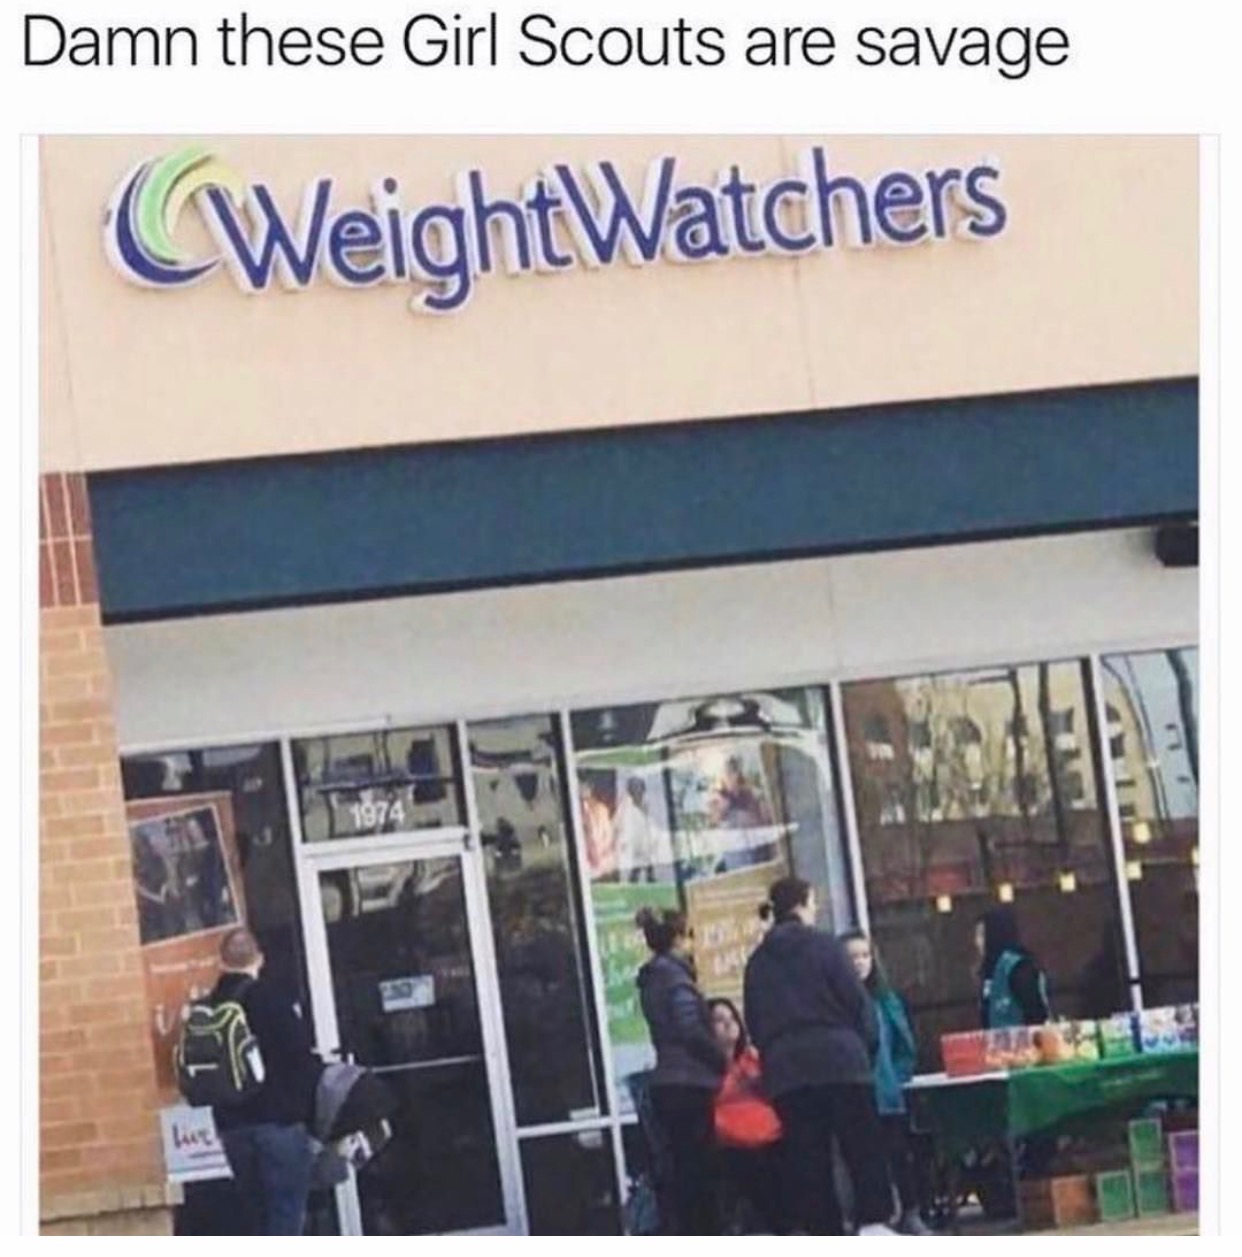 memes - these girl scouts are savage - Dani These Girl Scouts are savage WeightWatchers